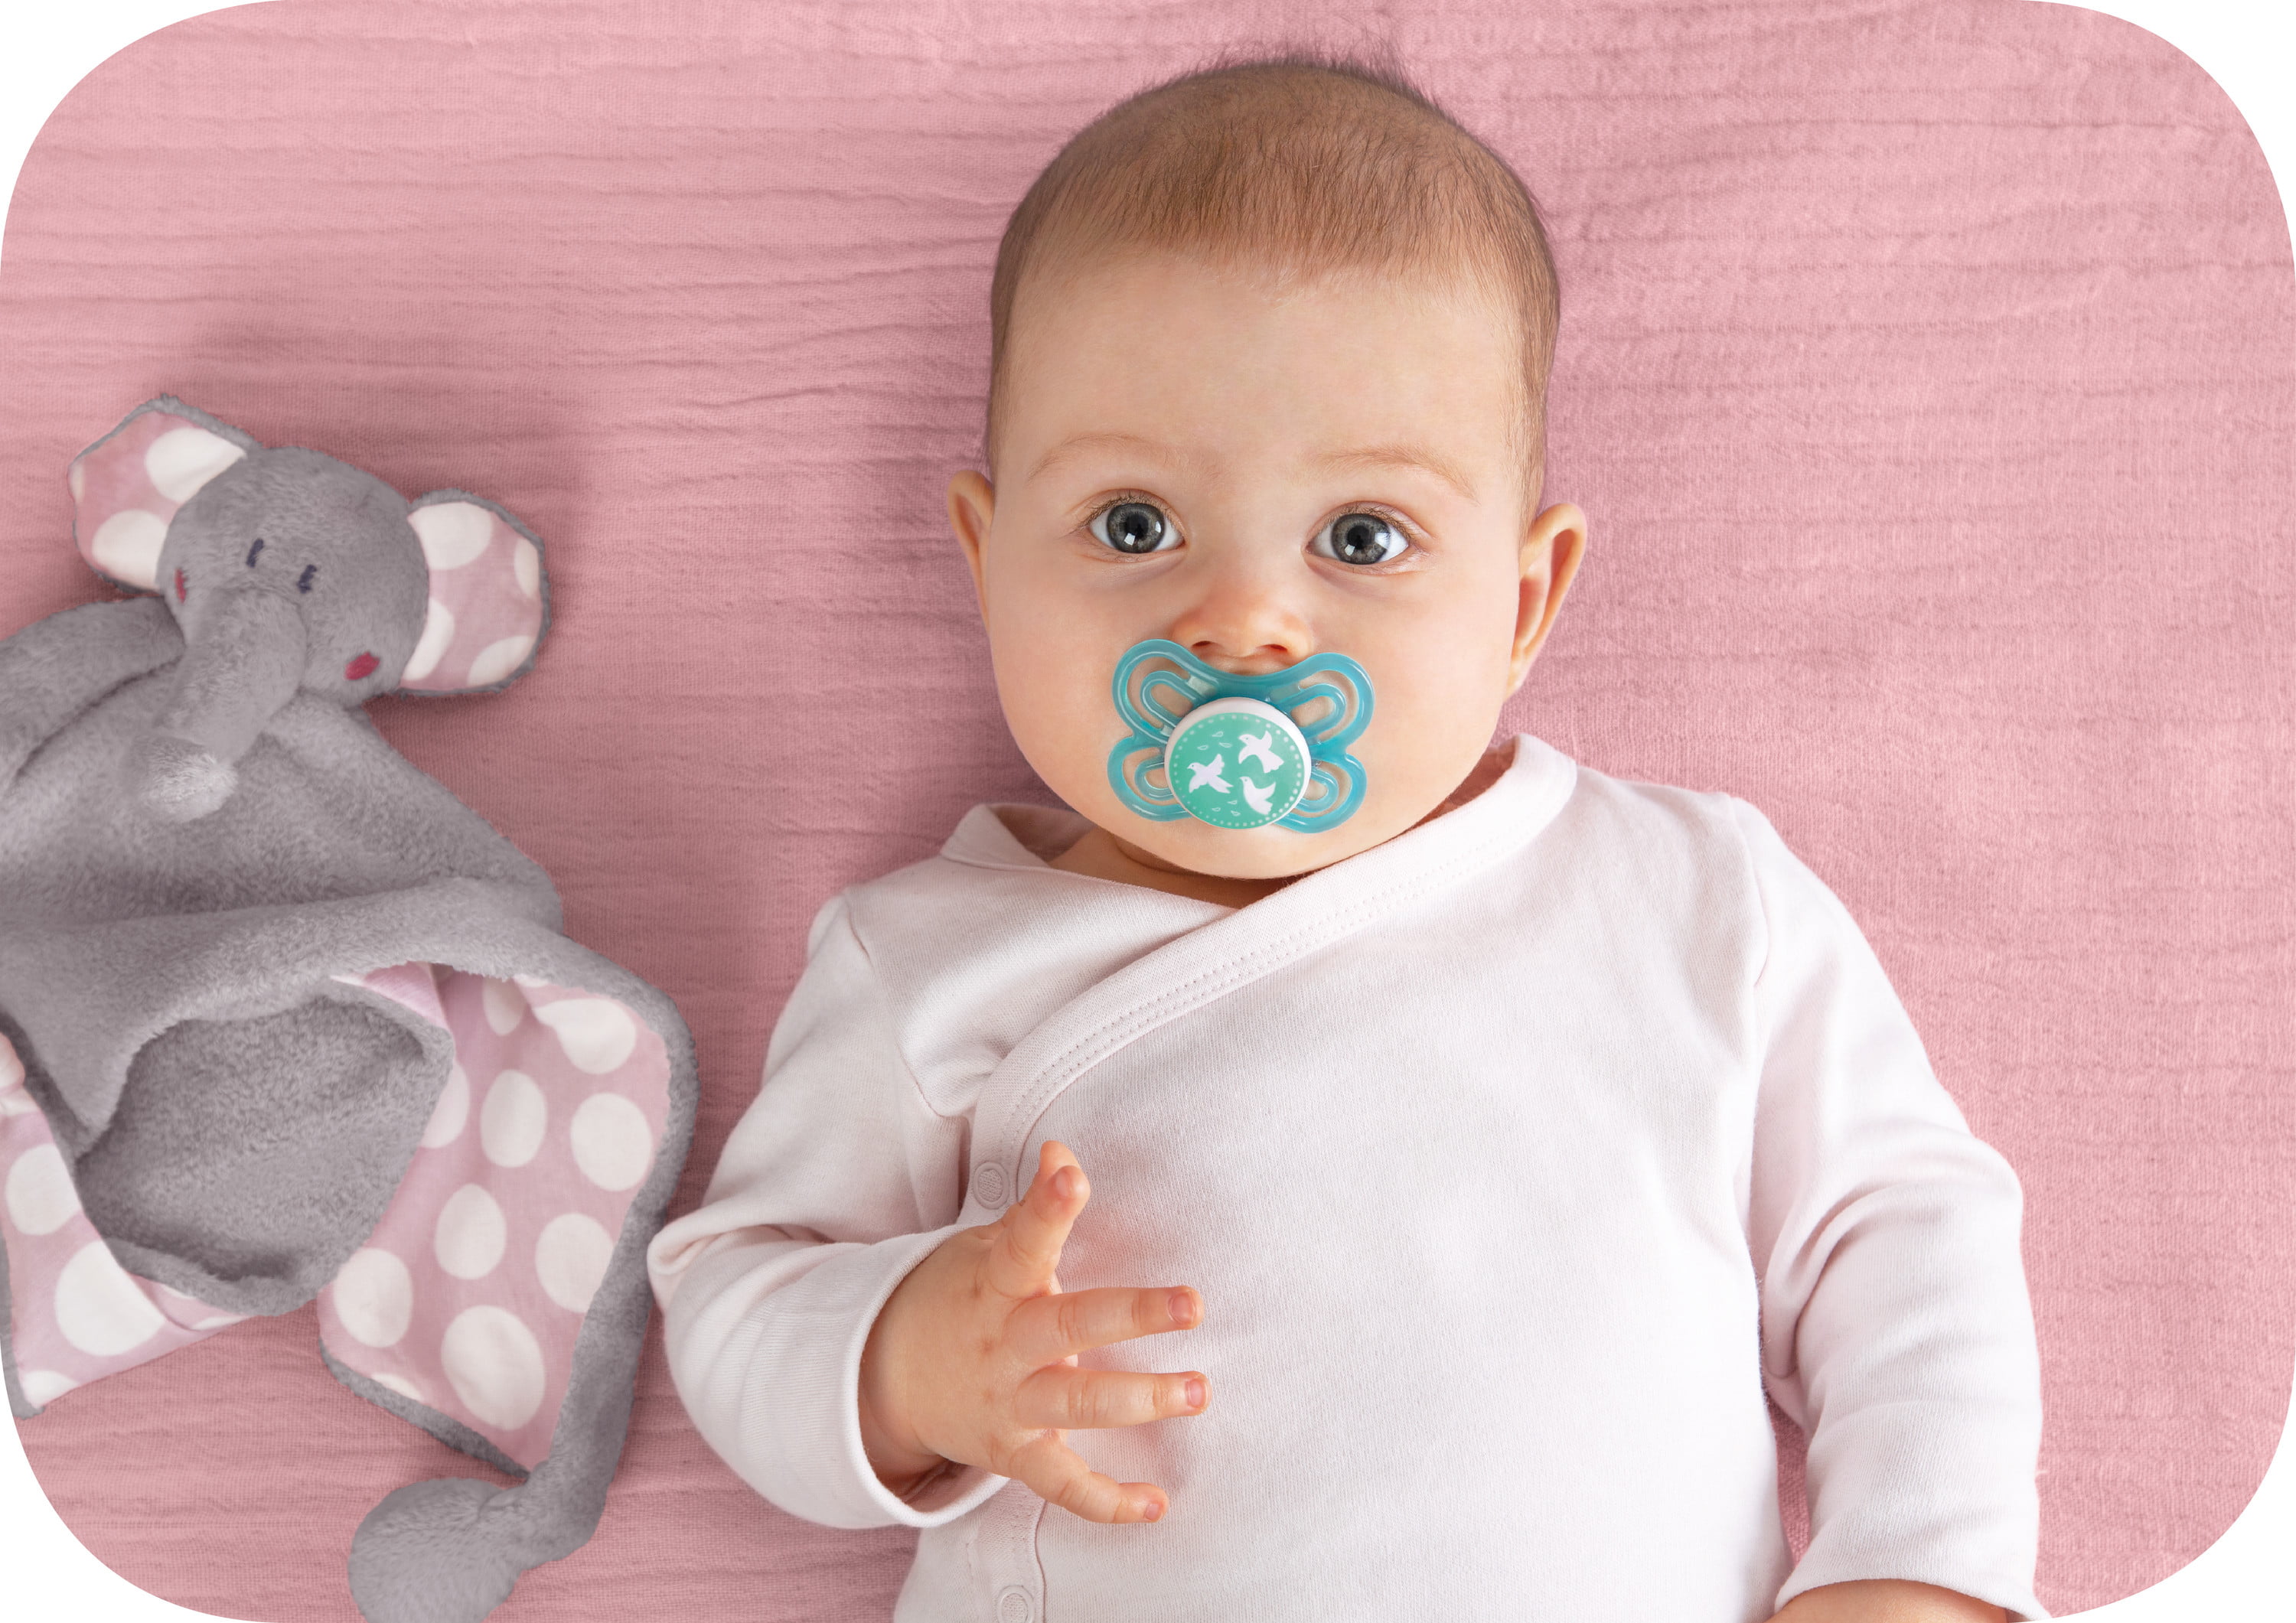 MAM Perfect Nuggi Silicone 0-6 Months 2 pieces buy online